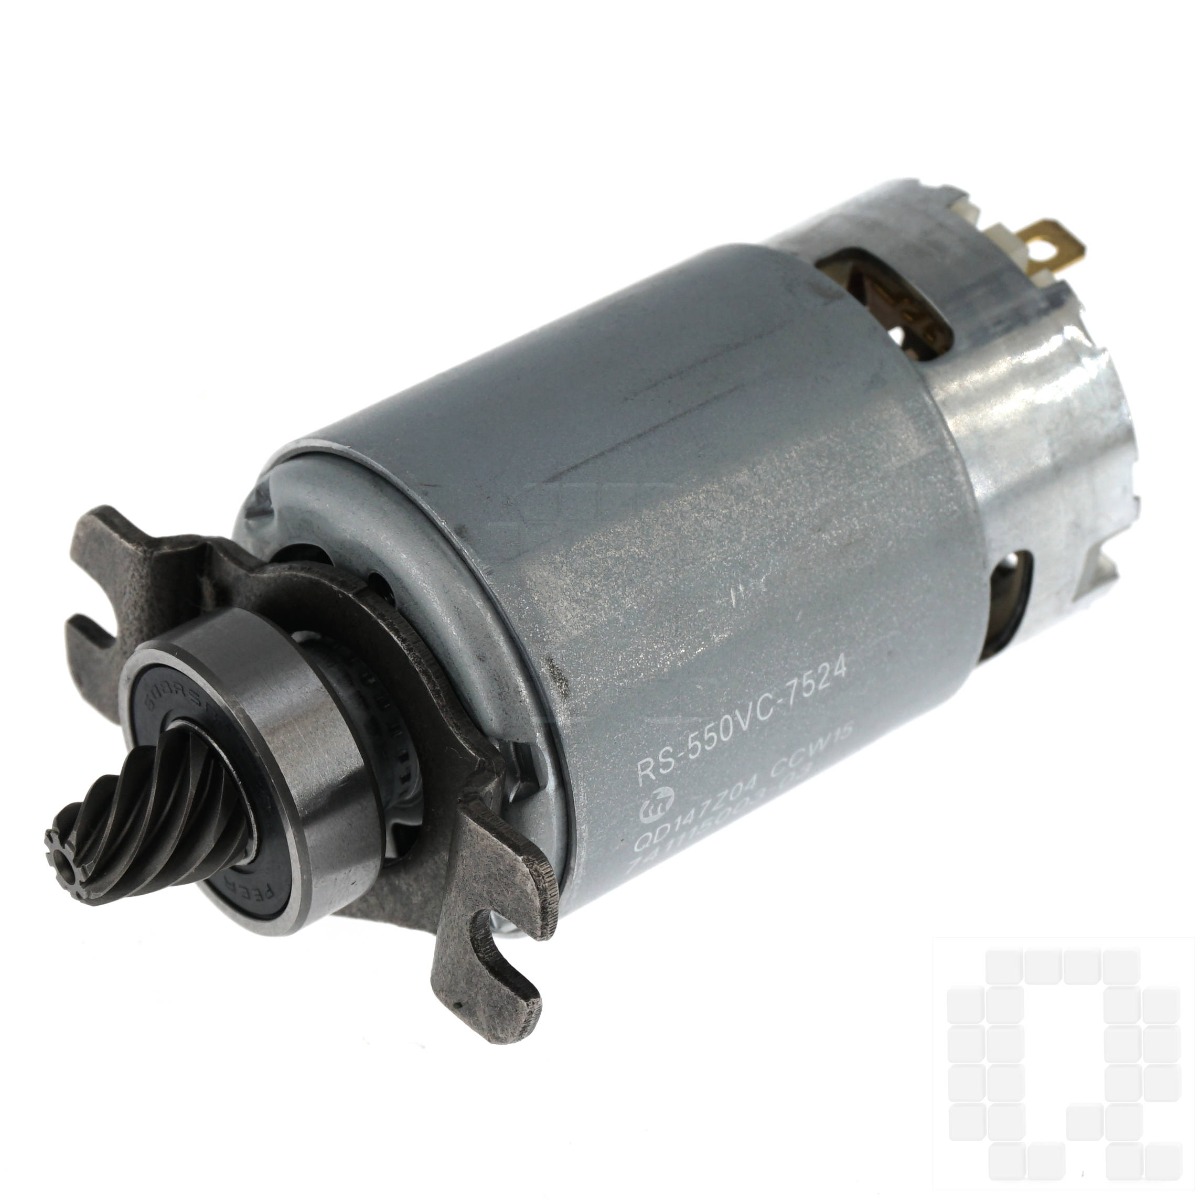 Milwaukee 23-30-0020 Electric Motor Assembly